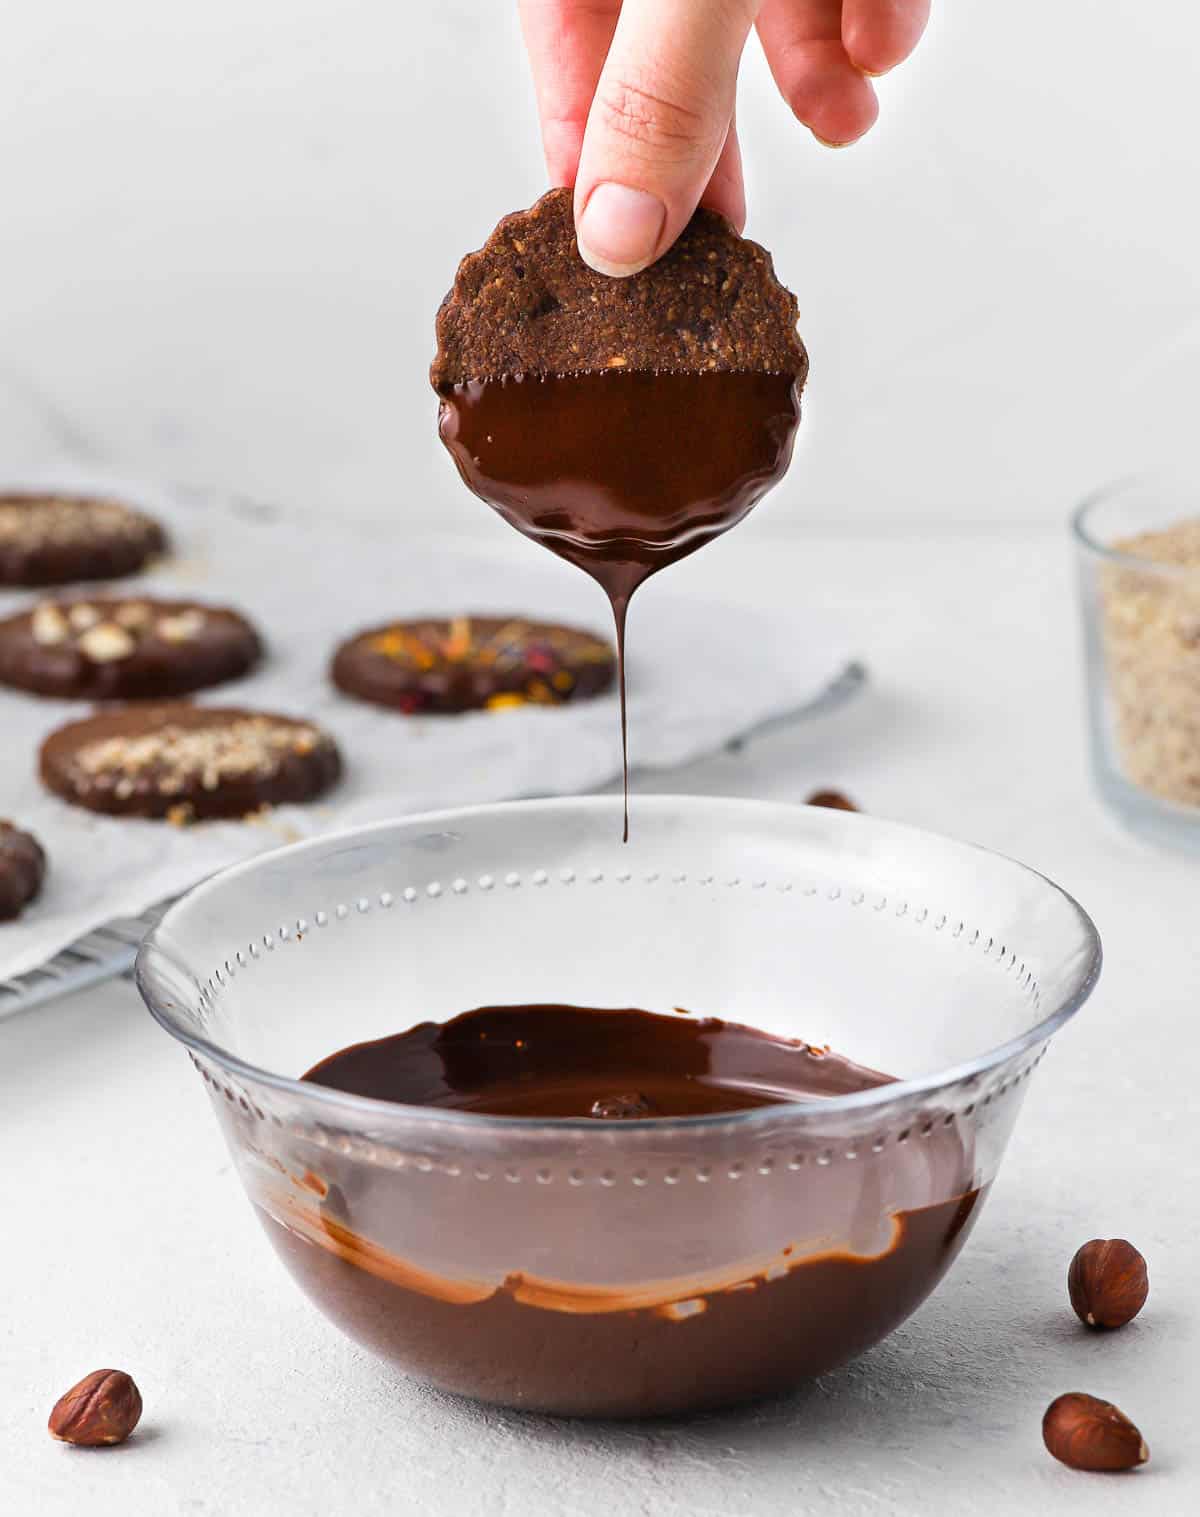 Dipping one cookie in melted chocolate.